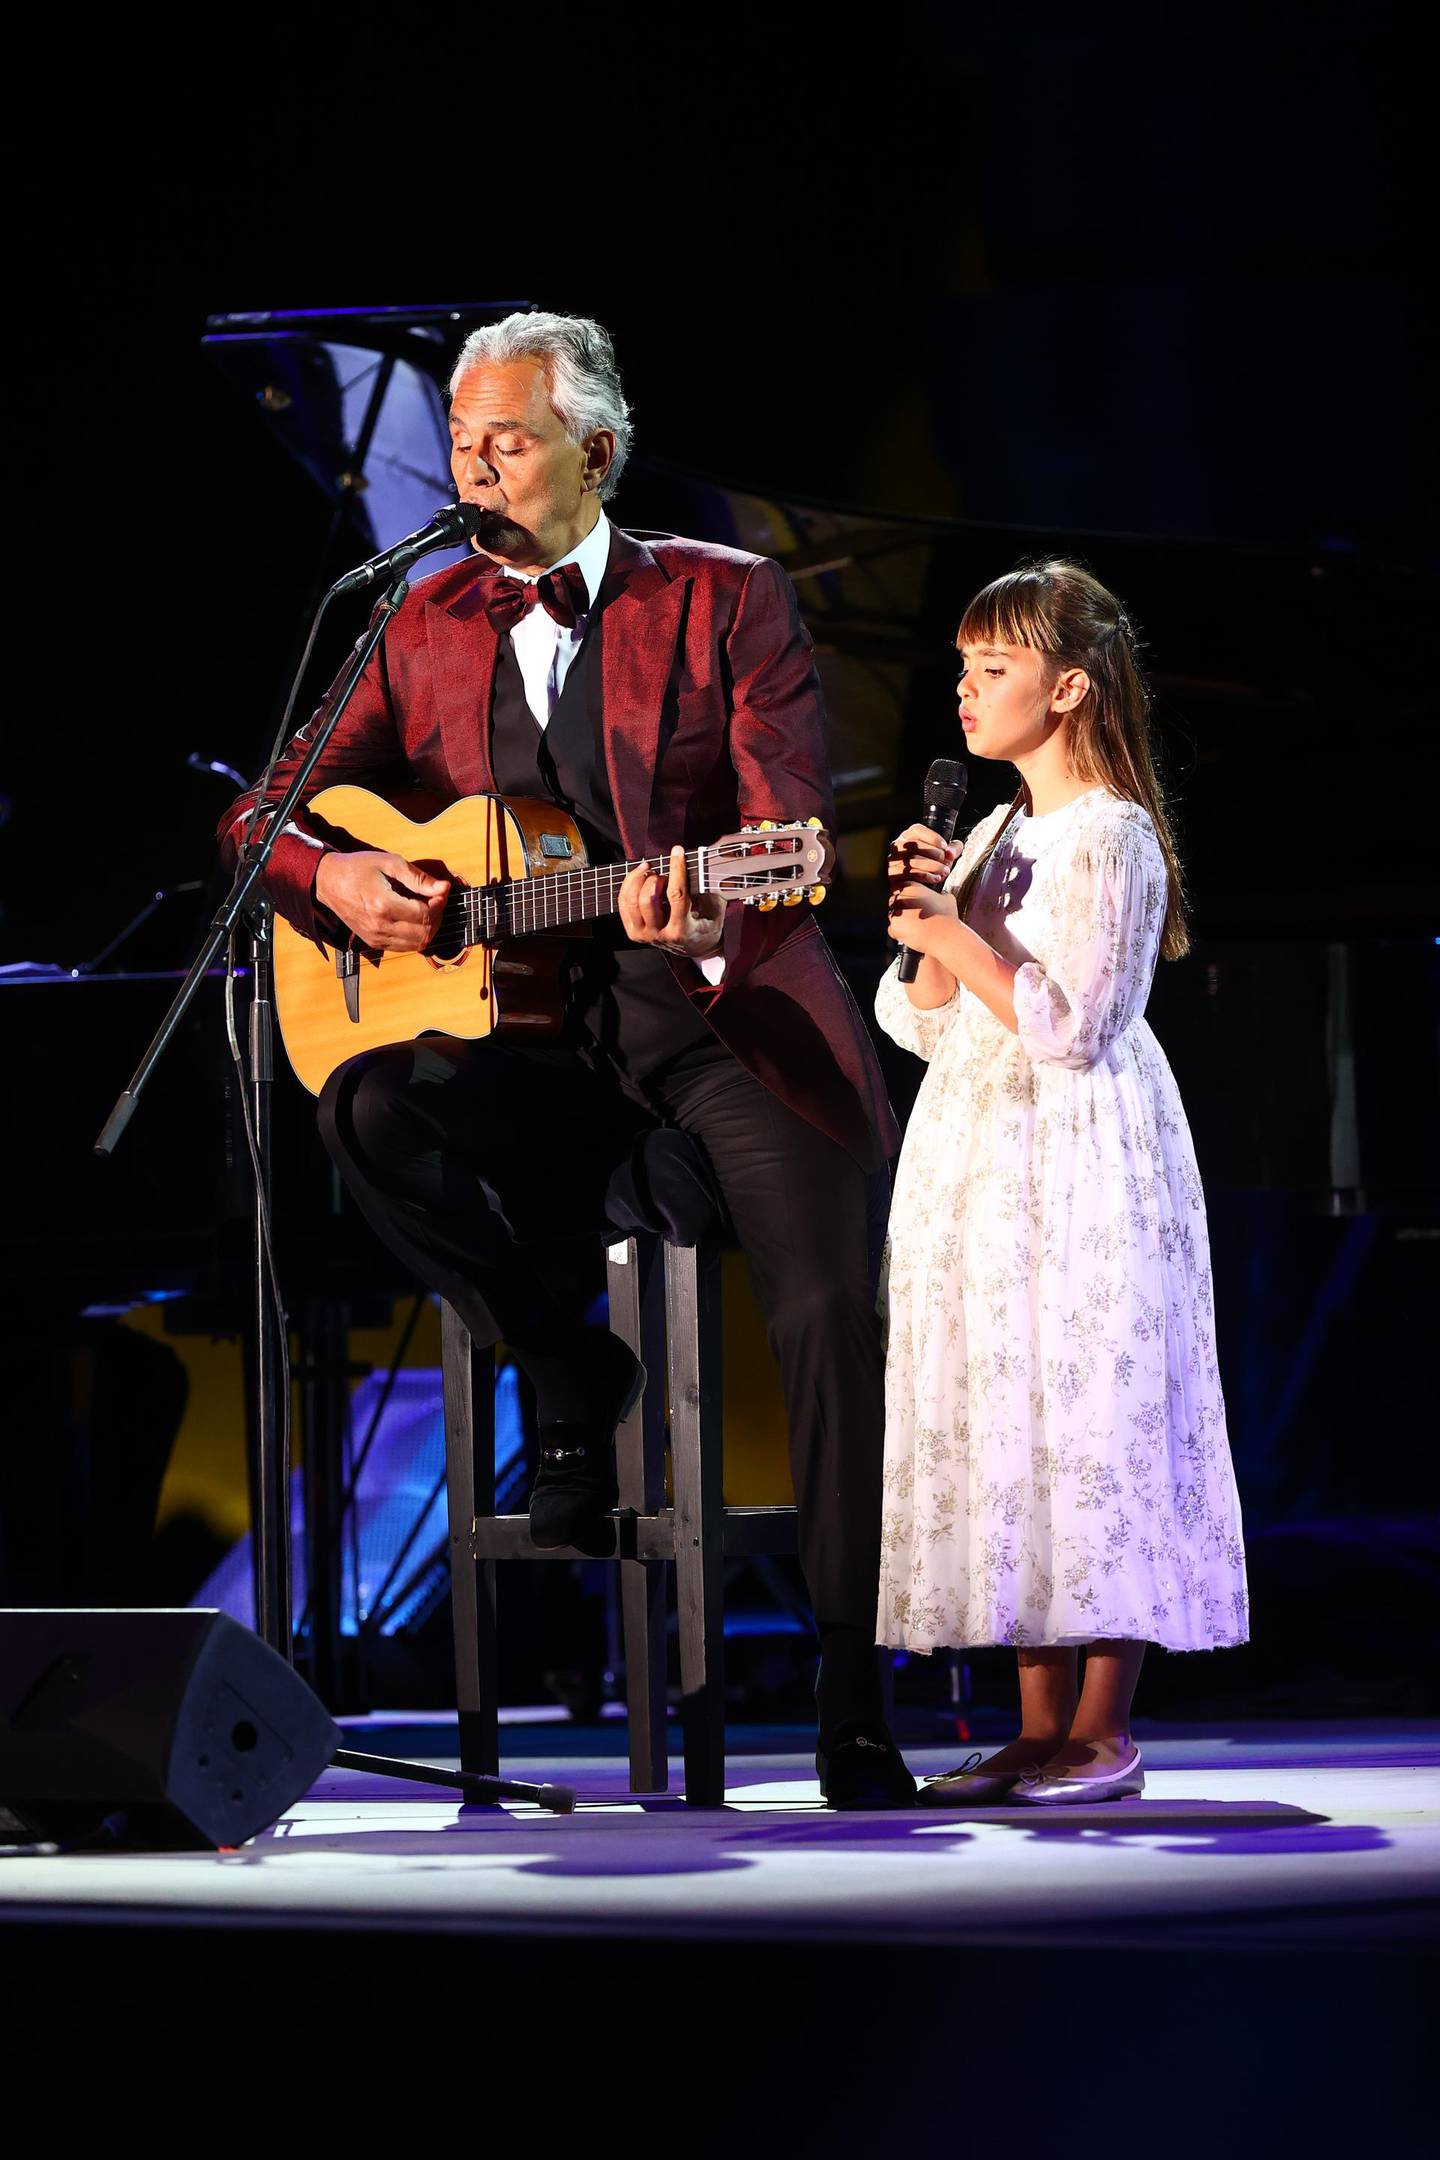 TABUK, SAUDI ARABIA - APRIL 08: Andrea Bocelli performs in concert with his daughter Virginia Bocelli on April 08, 2021 at World Heritage Site Hegra in AlUla near Tabuk, Saudi Arabia. (Photo by Francois Nel/Getty Images for The Royal Commission for AlUla)